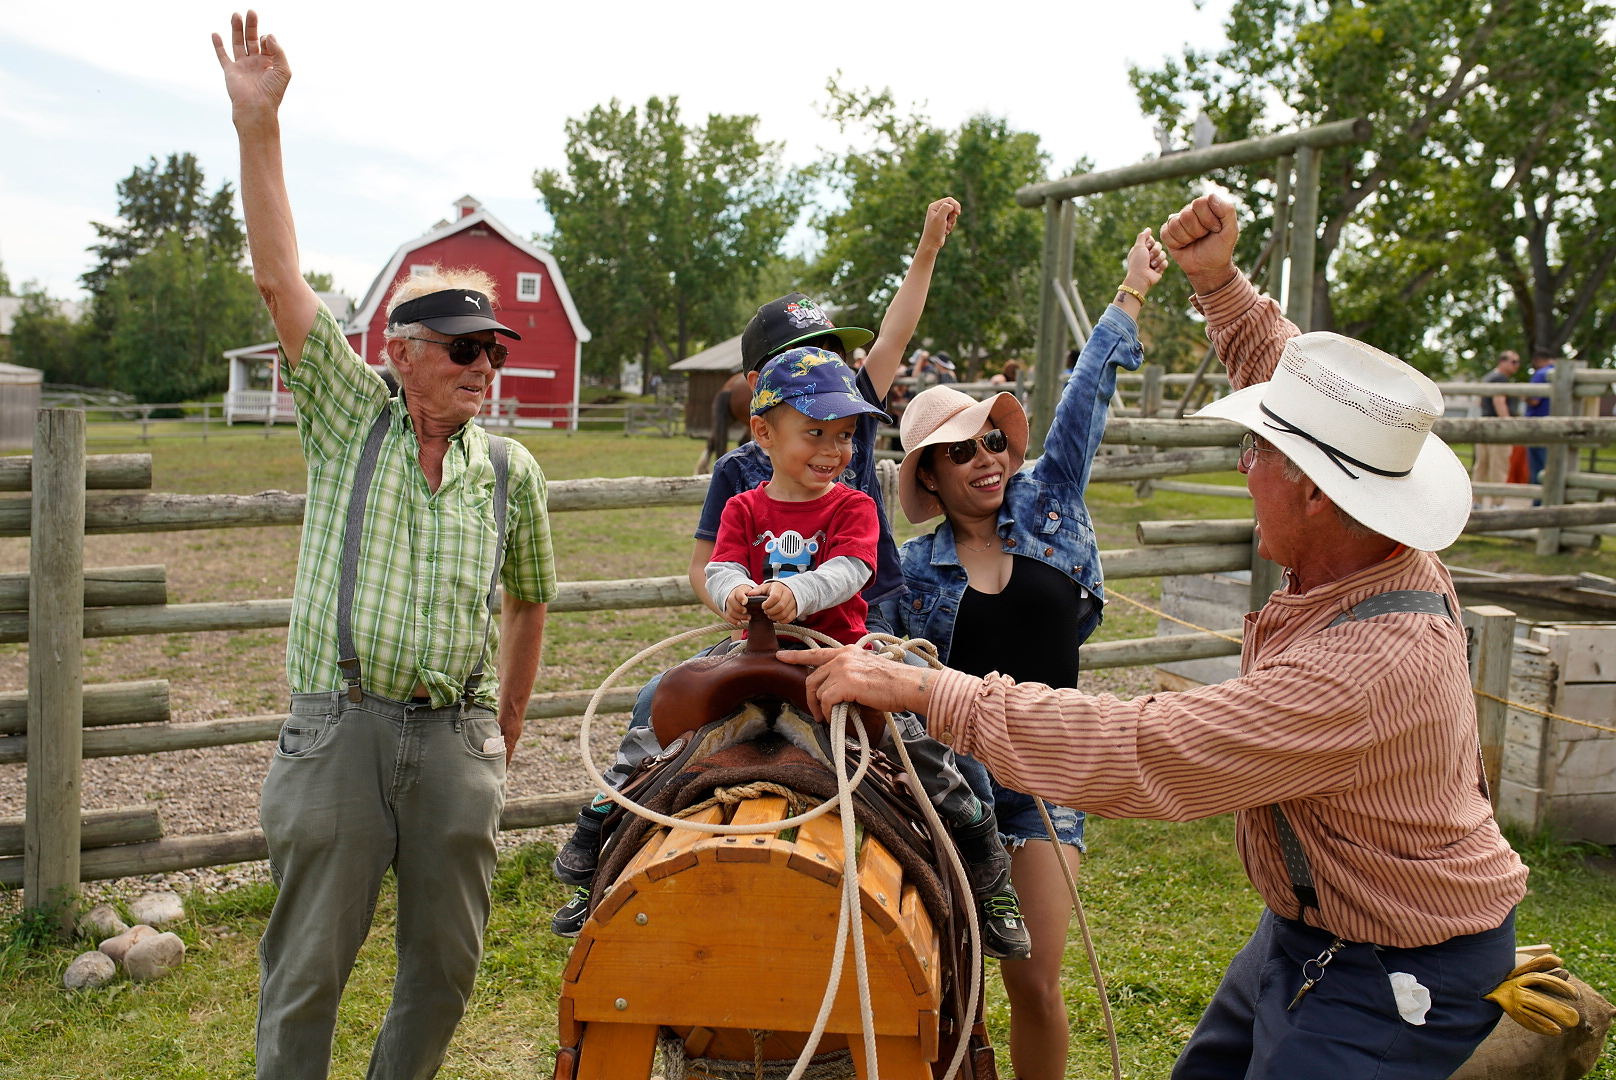 A family has fun learning to rope in the Agriculture Area of Heritage Park's Historical Village in Calgary